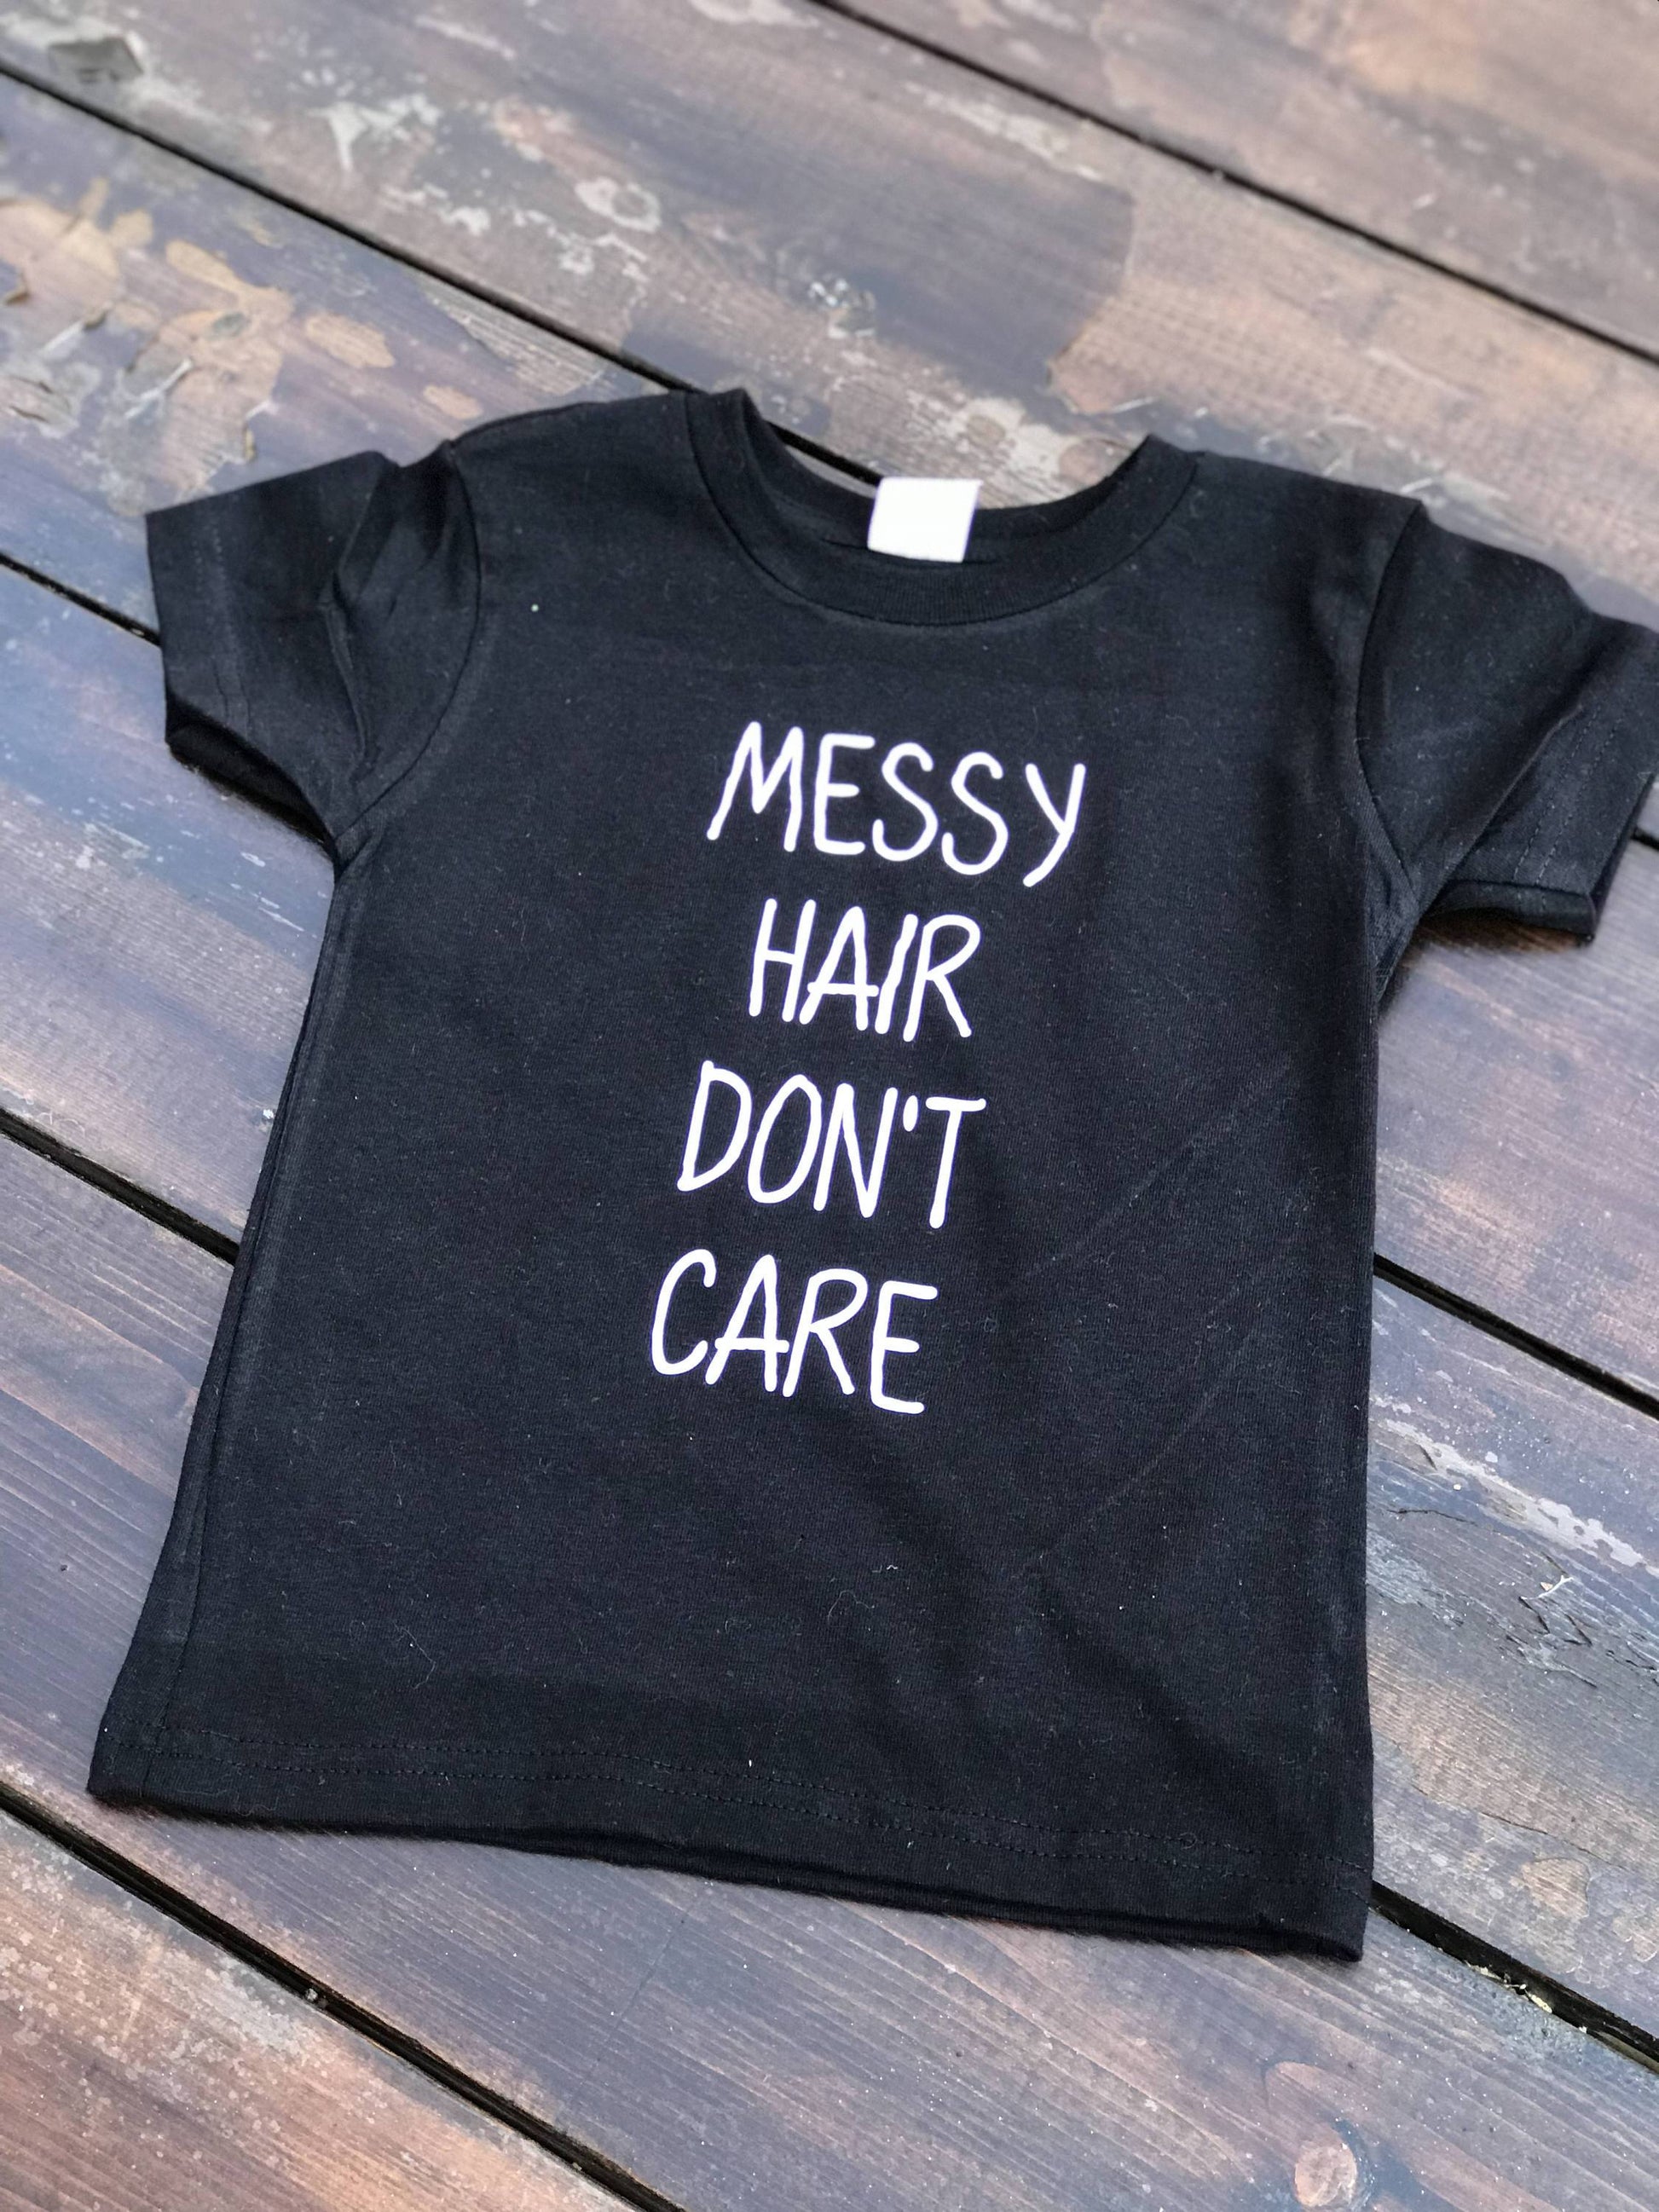 Handcrafted Children's Clothing, Clothing for Children and Parents, Messy Hair Don't Care, chi-fashionista